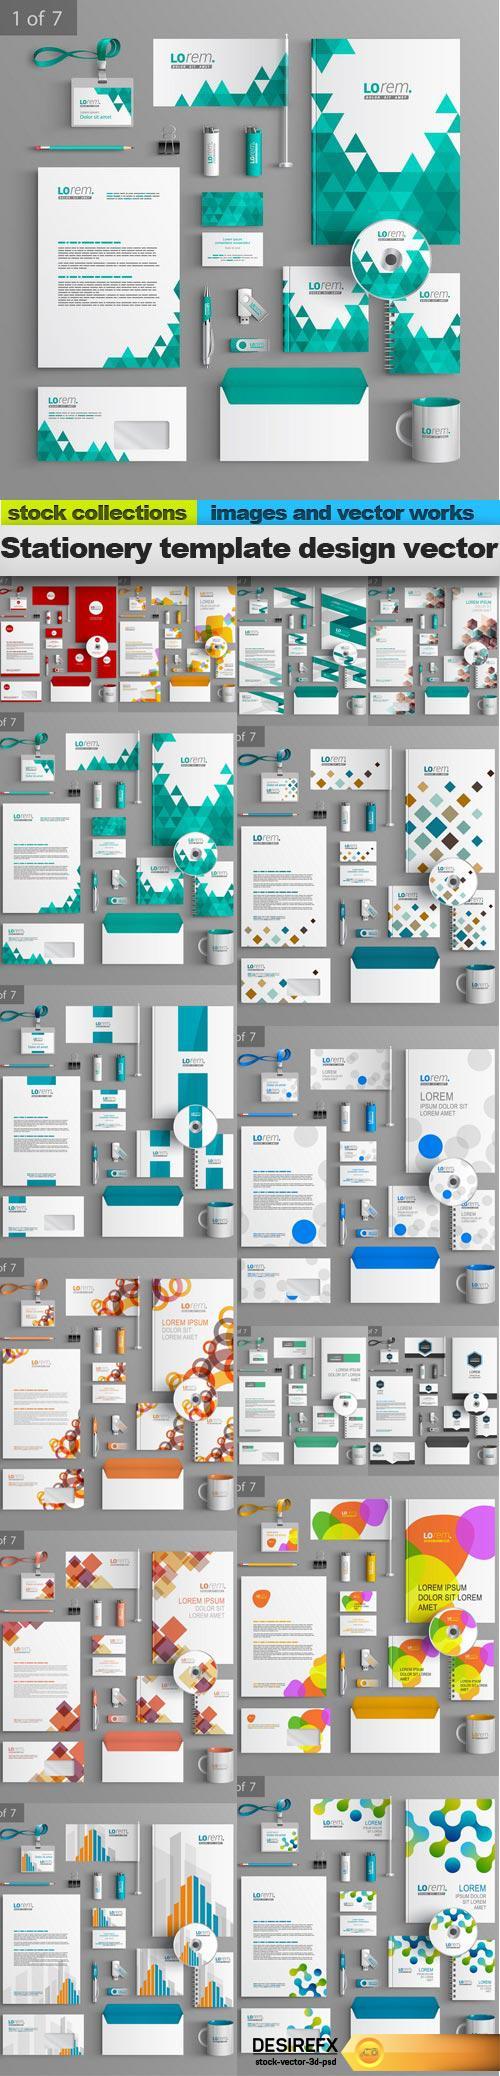 Stationery template design vector, 15 x EPS